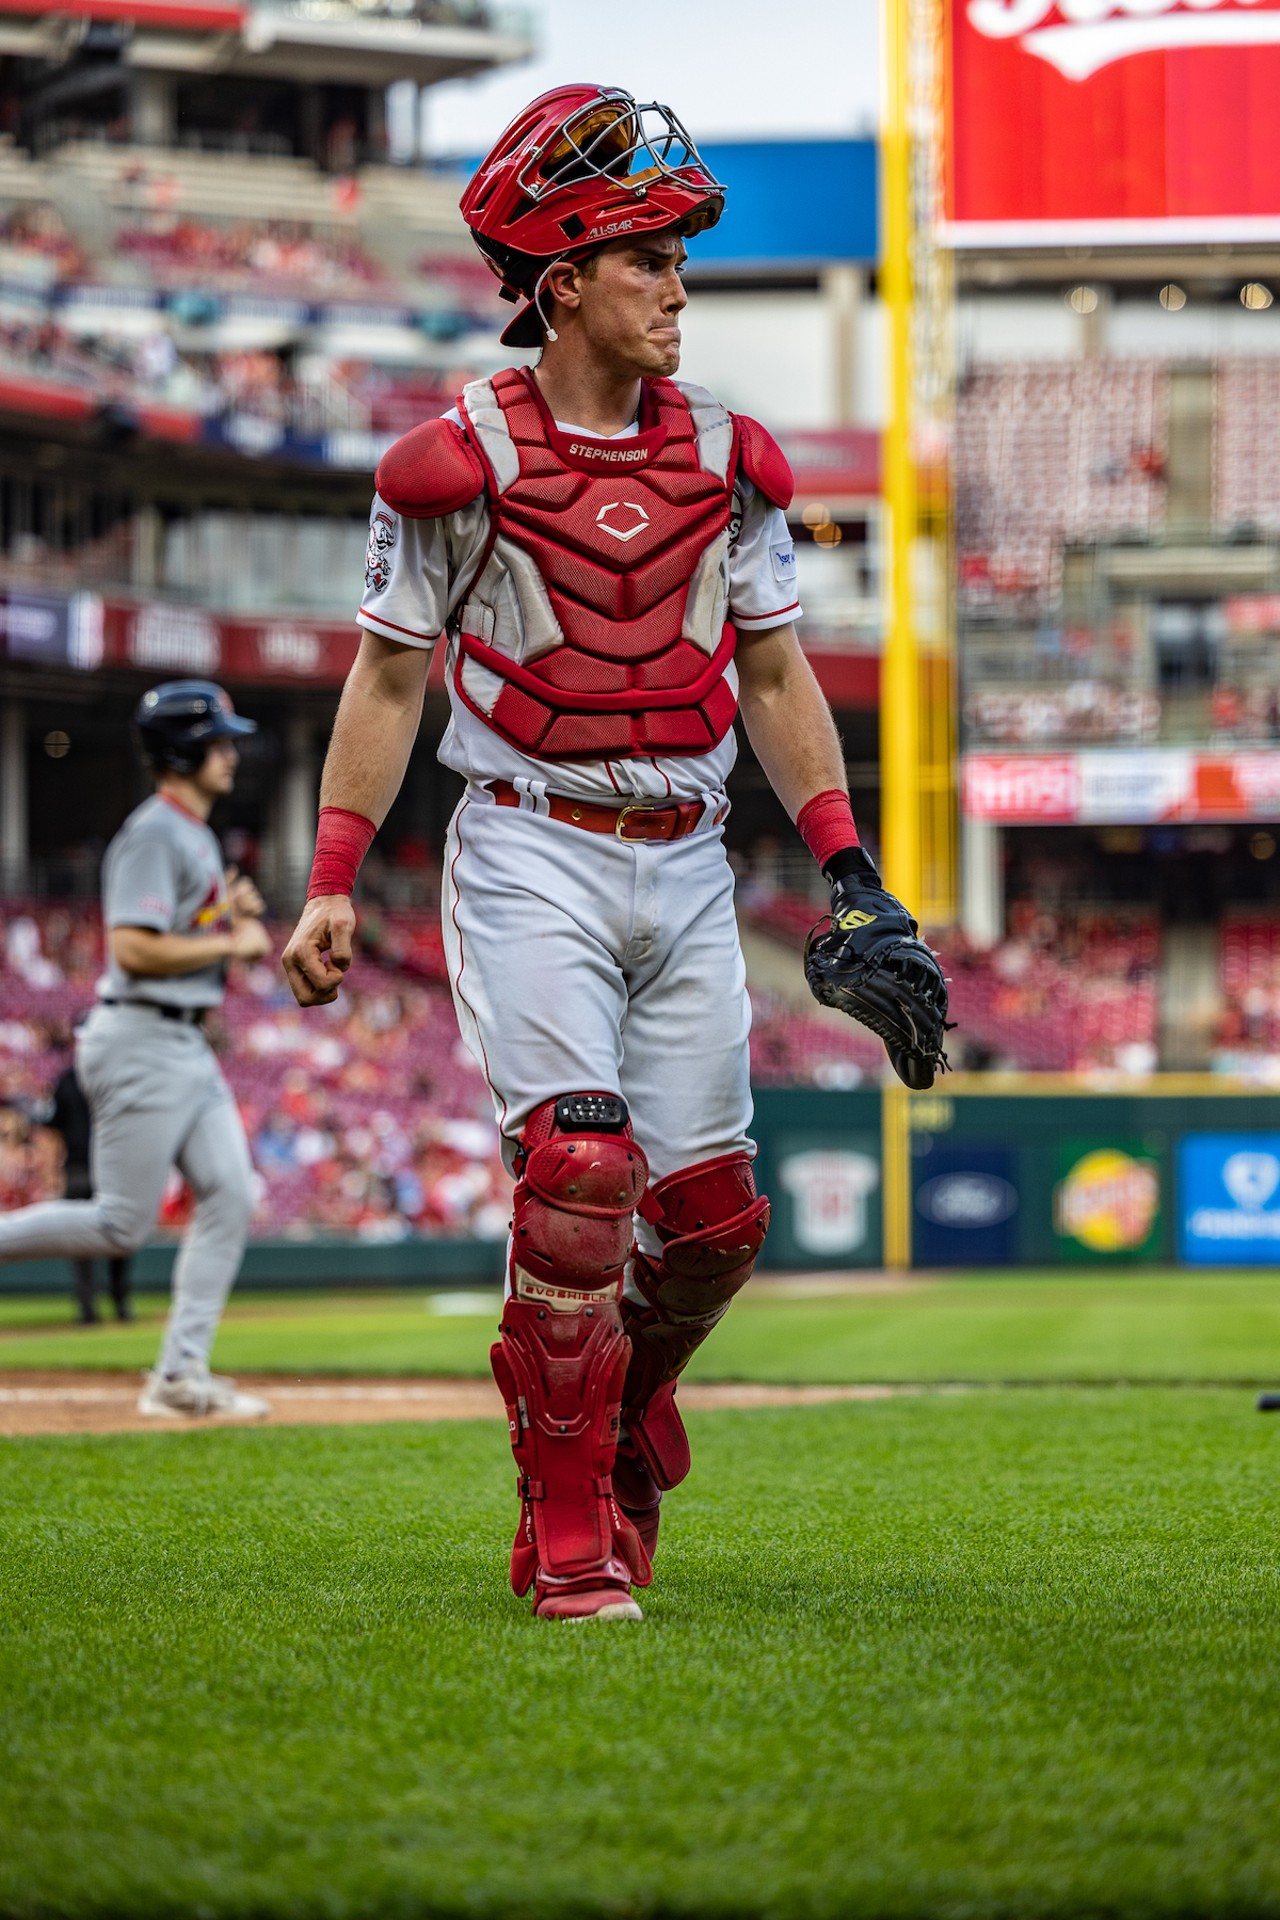 Cincinnati Reds catcher Tyler Stephenson during the game against the St. Louis Cardinals on May 23, 2023.